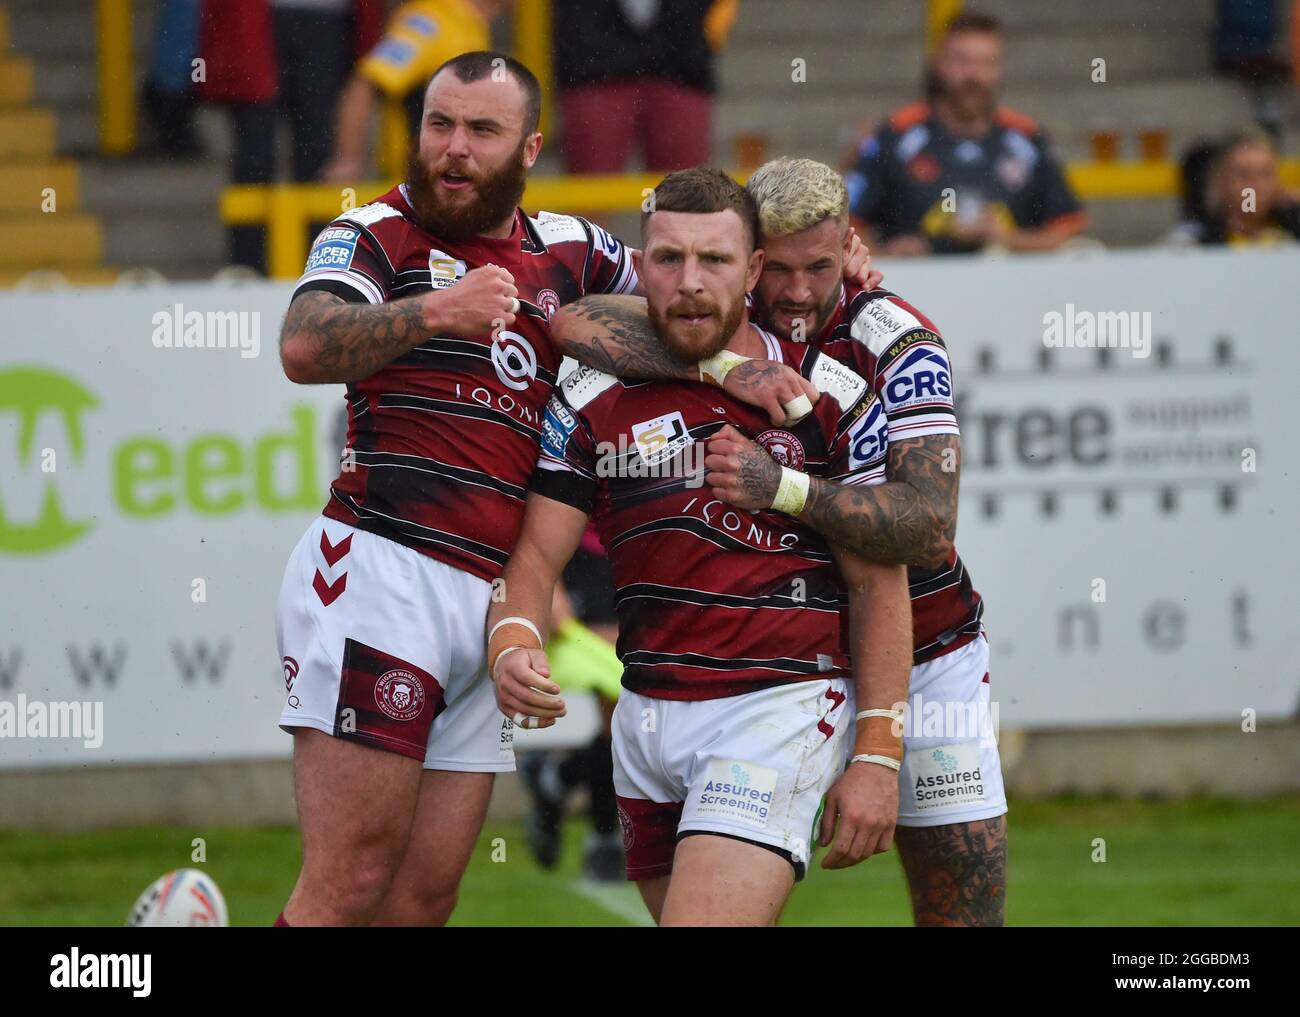 Castleford, West Yorkshire, UK. 30th Aug, 2021. Jackson Hastings of Wigan Warriors celebrates his try during the Betfred Super League game between Castleford Tigers V Wigan Warriors at the Mend A Hose Jungle, Castleford, West Yorkshire, UK on the 22nd August 2021 Credit: Craig Cresswell/Alamy Live News Stock Photo